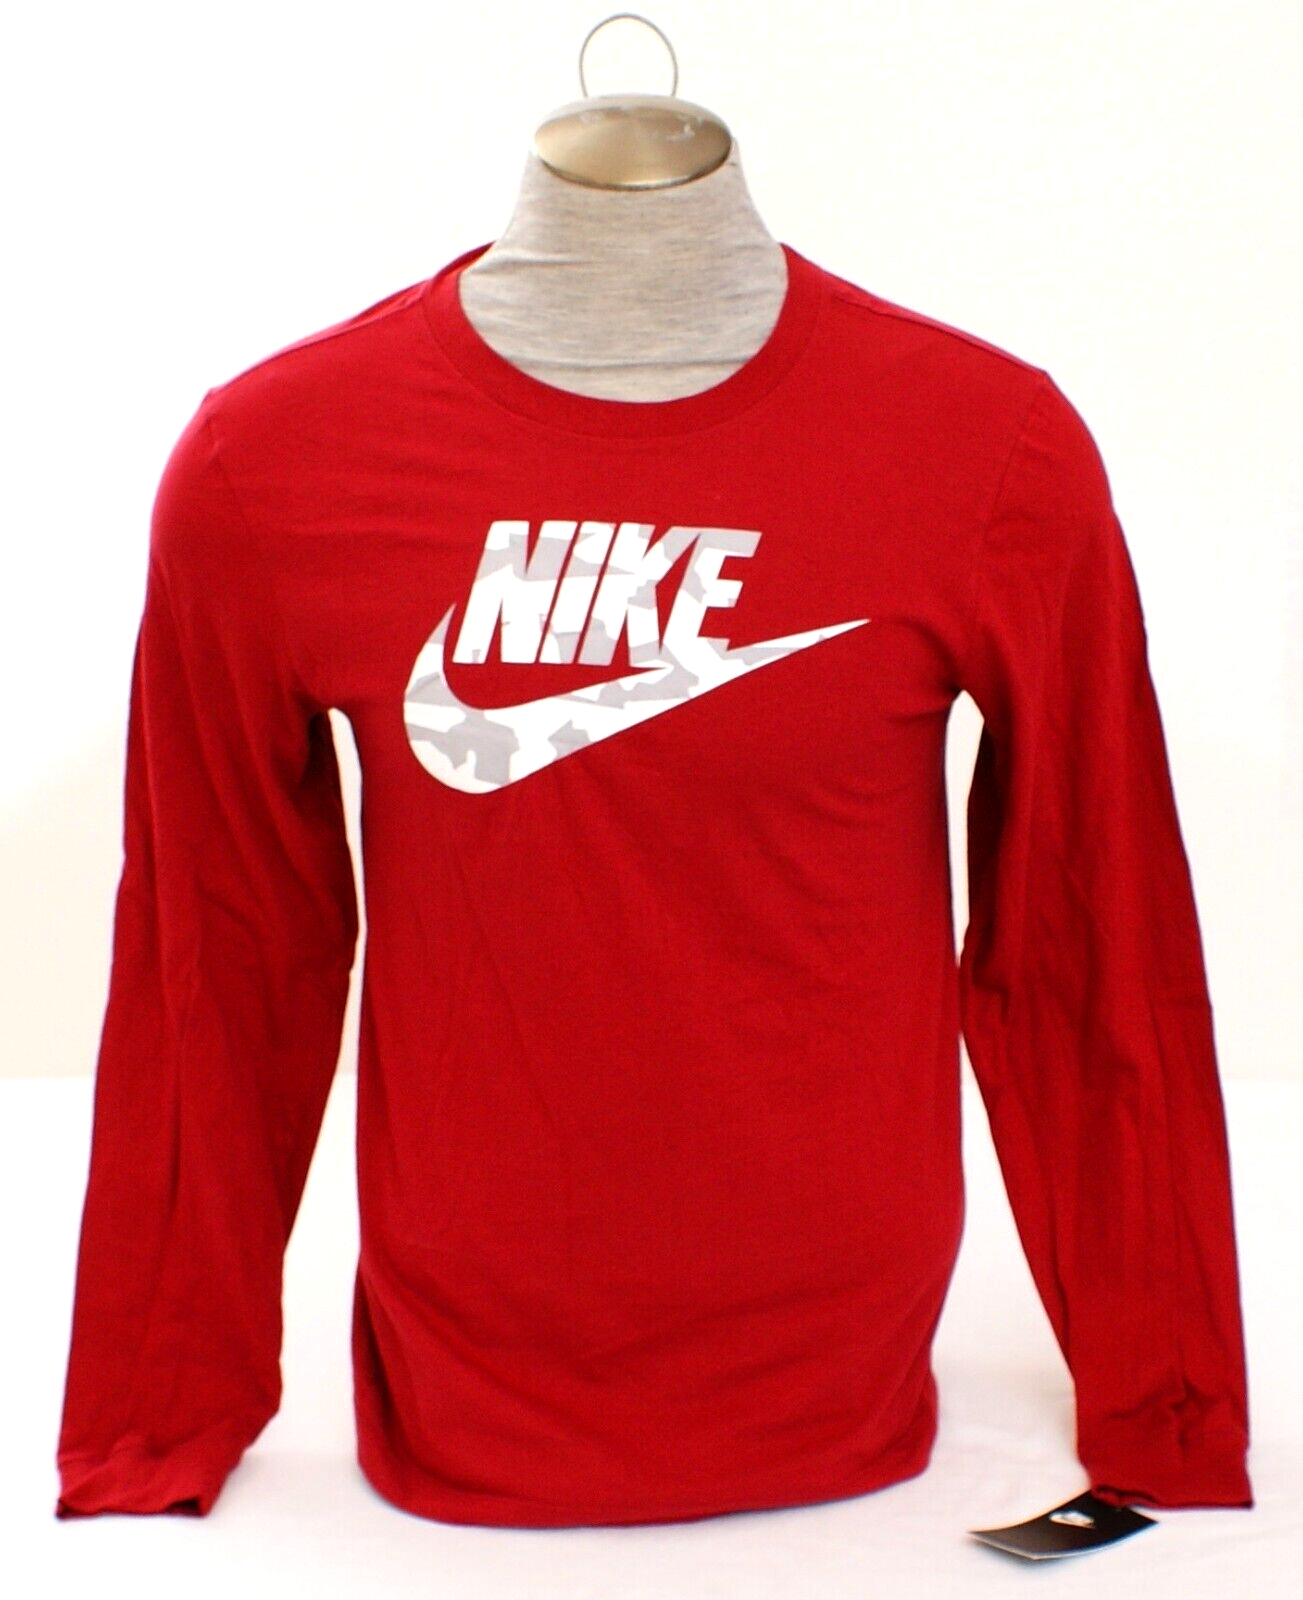 Primary image for Nike Crimson Red Camo Logo Long Sleeve Signature Tee T Shirt Men's L